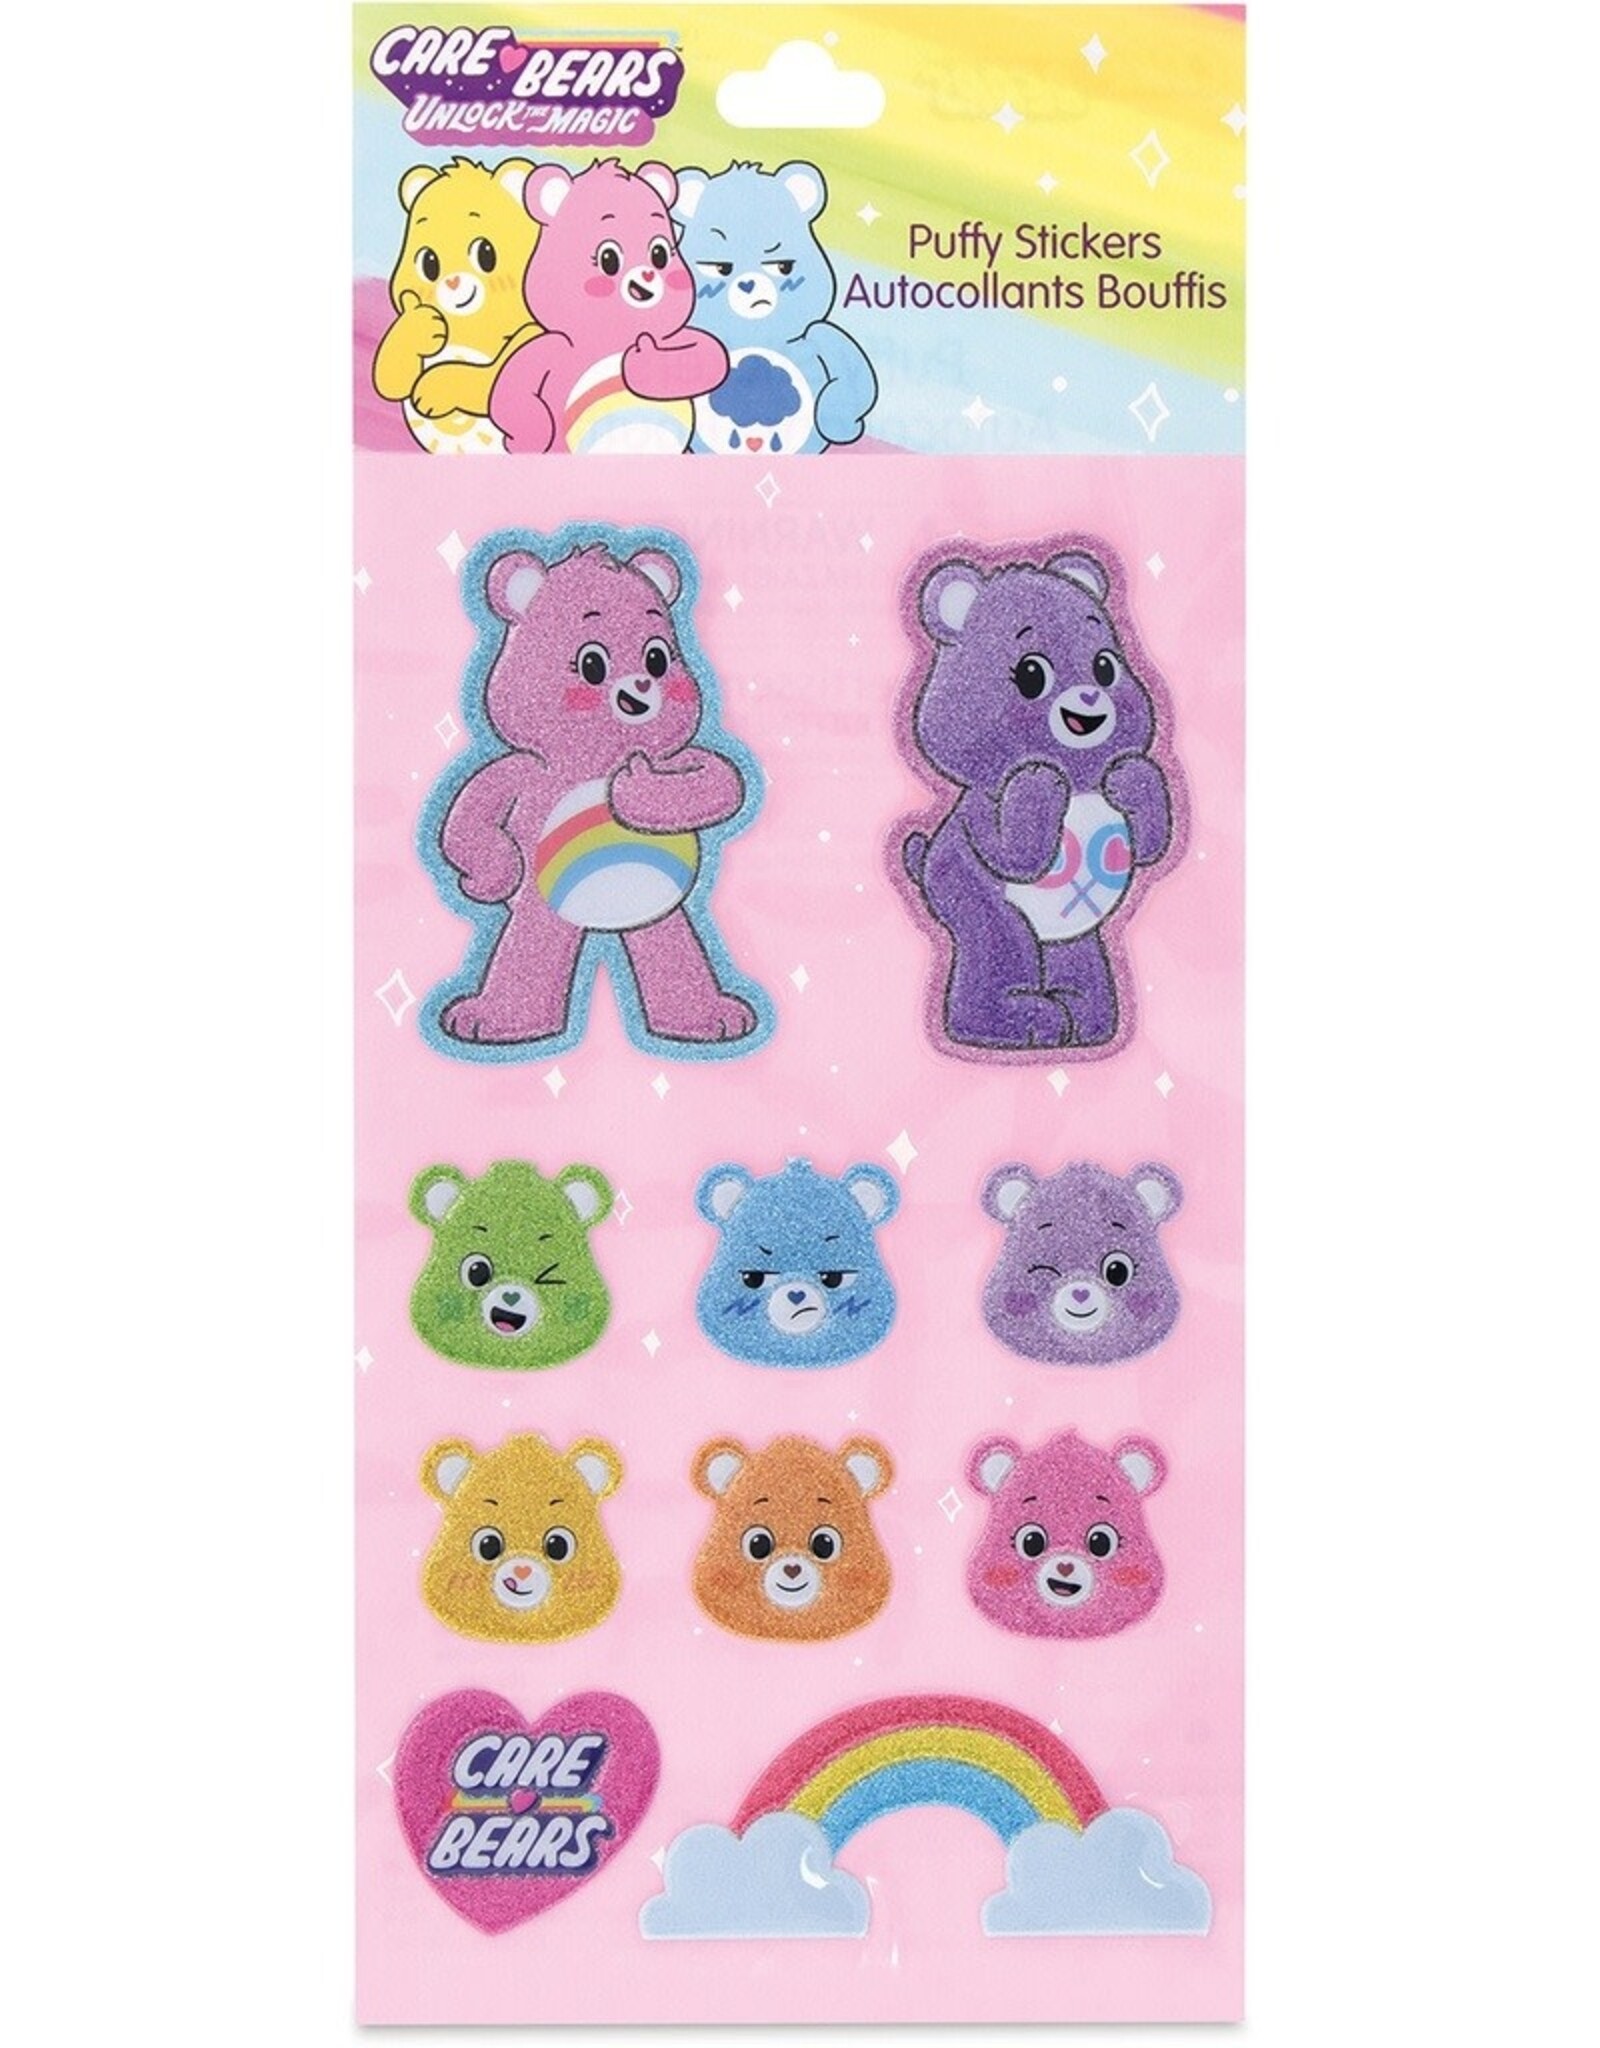 Team Care Bears Puffy Stickers